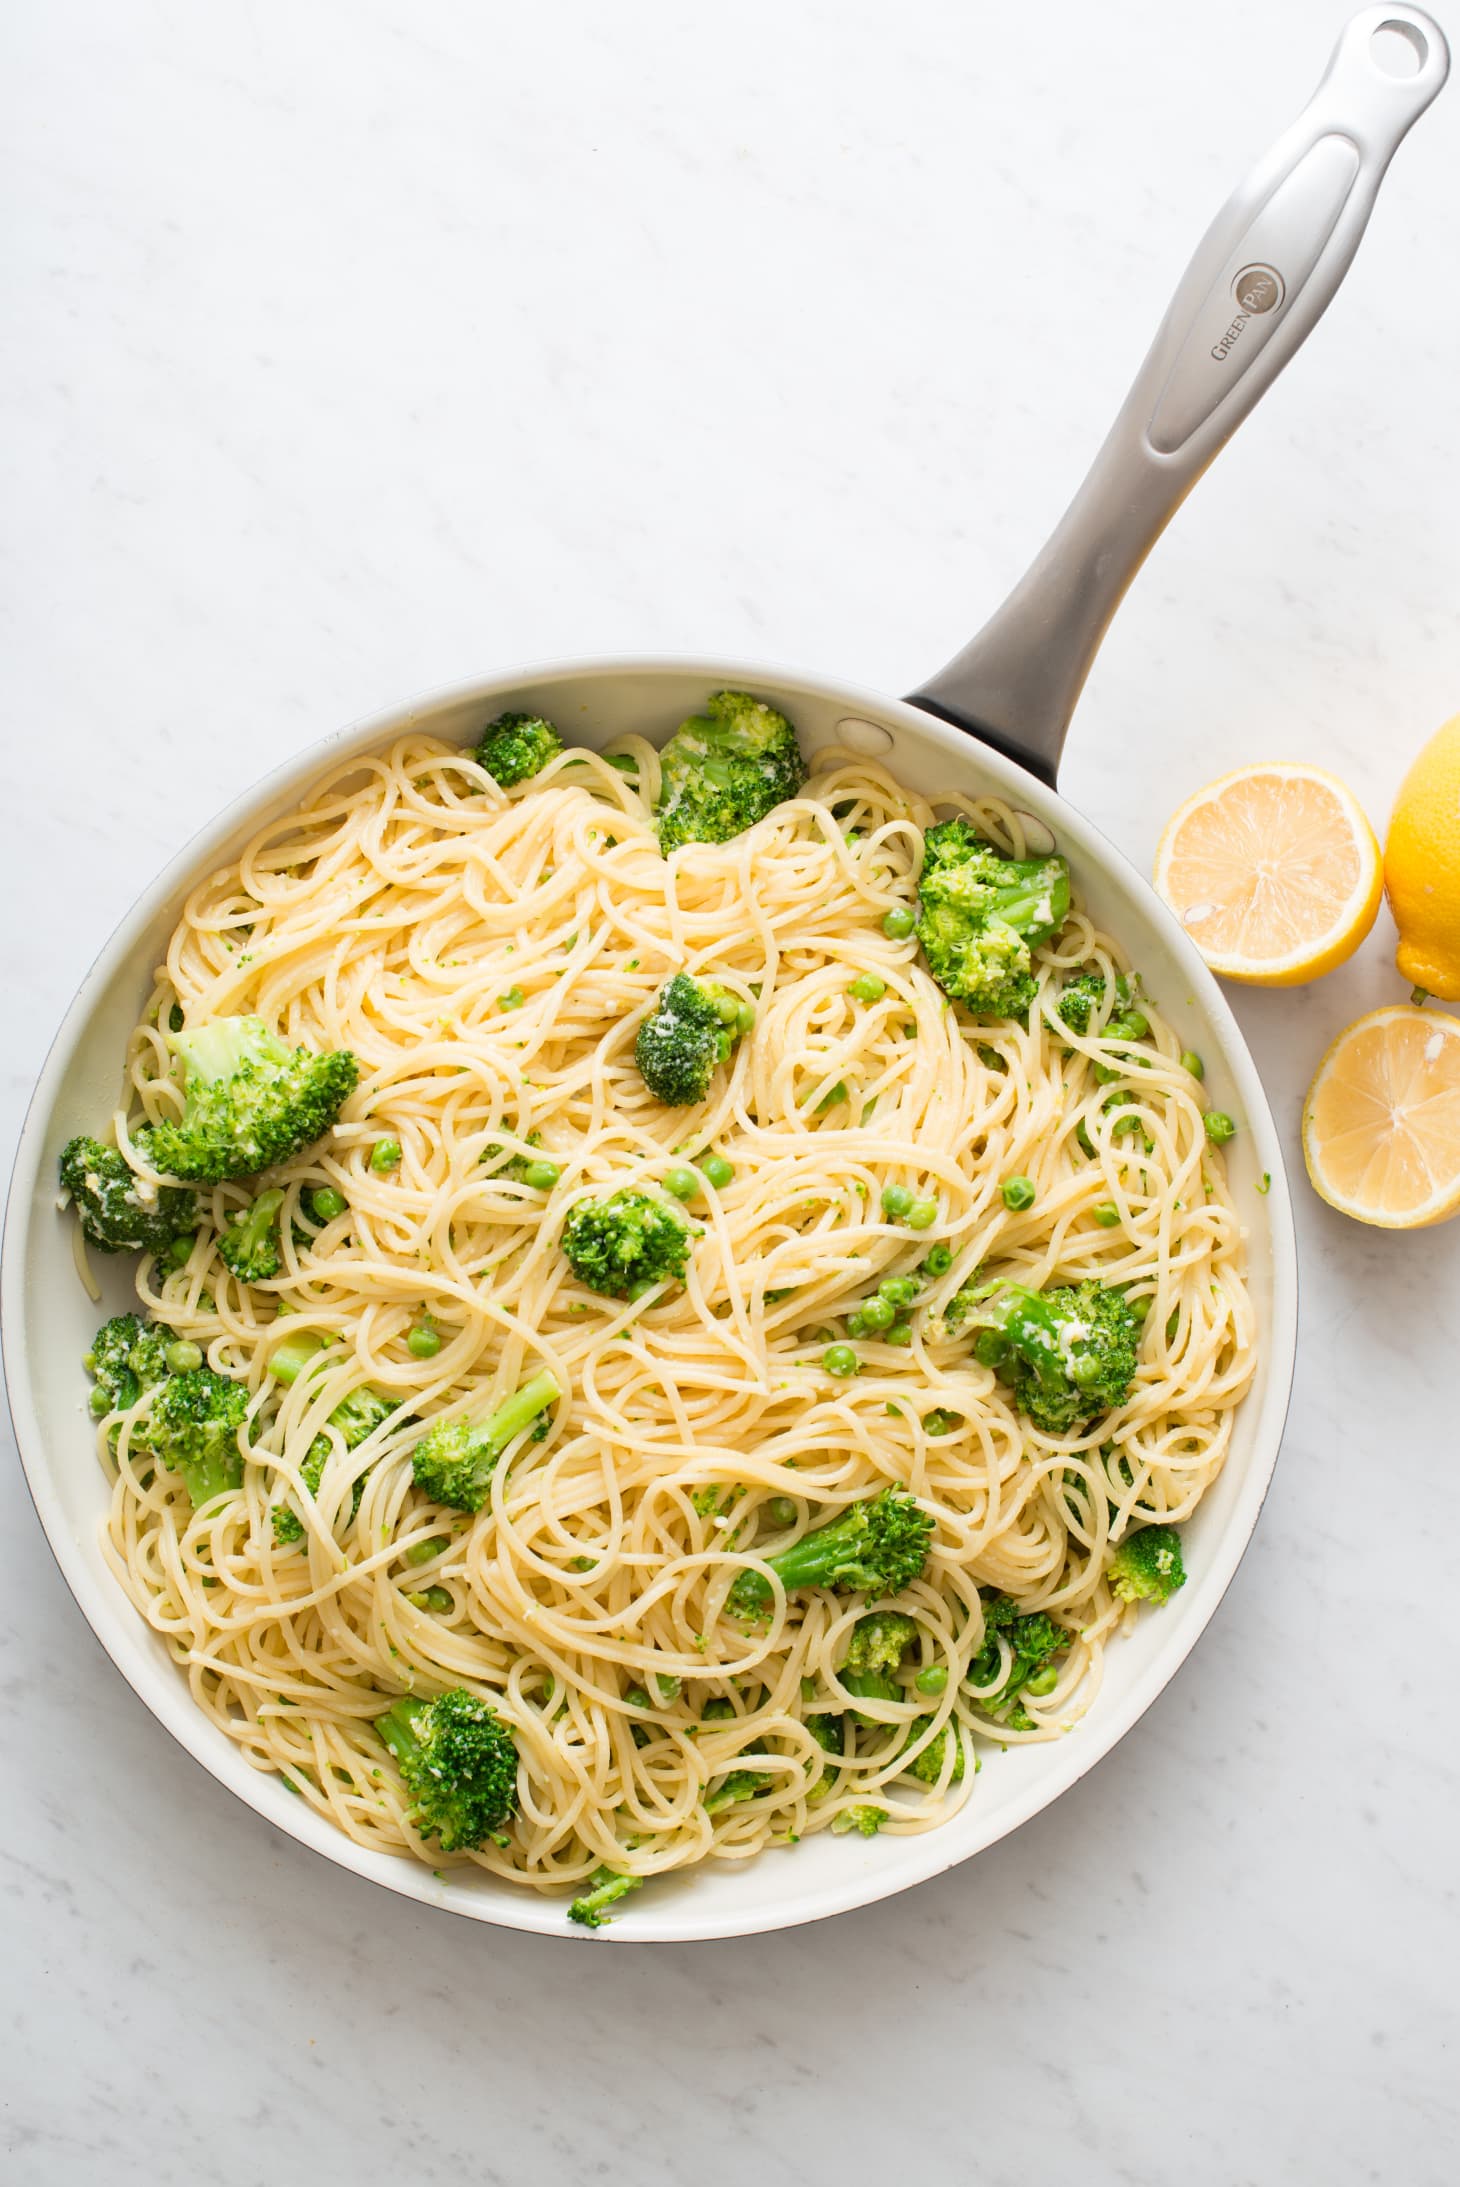 Best Meatless Pasta Recipes | Kitchn